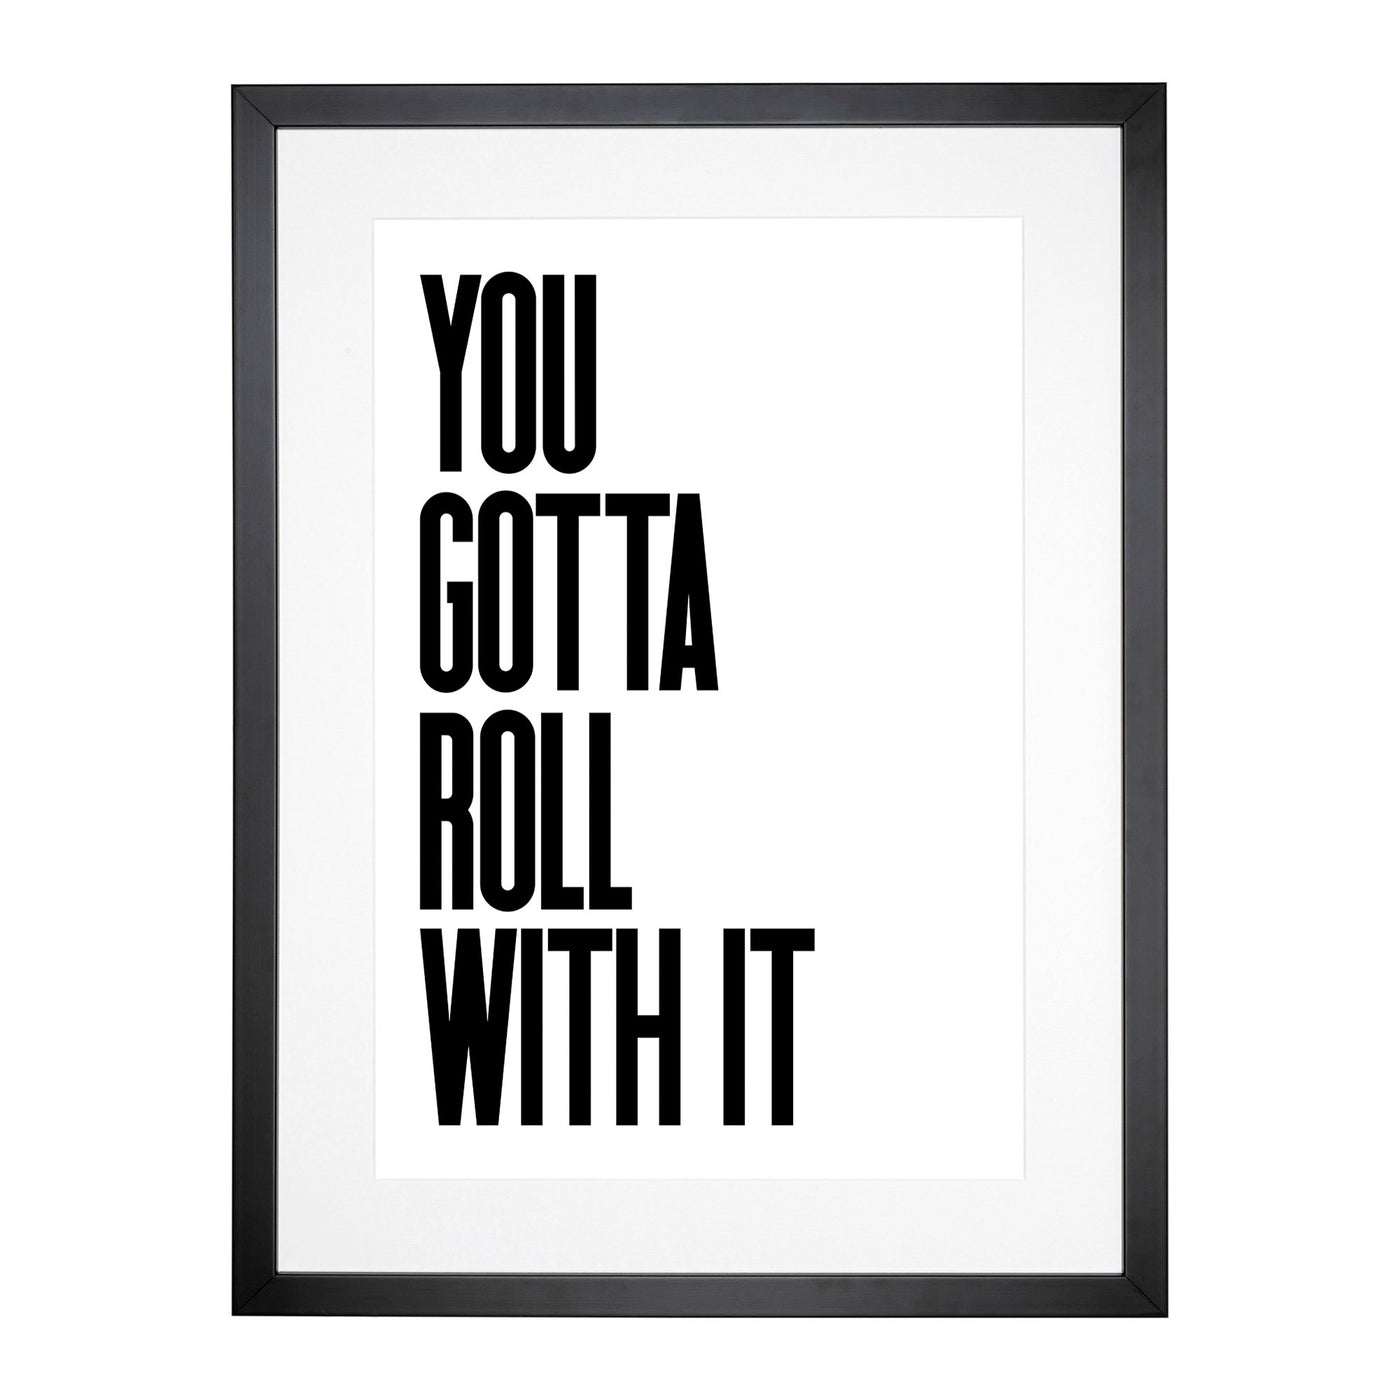 You Gotta Roll With It V2 Typography Framed Print Main Image